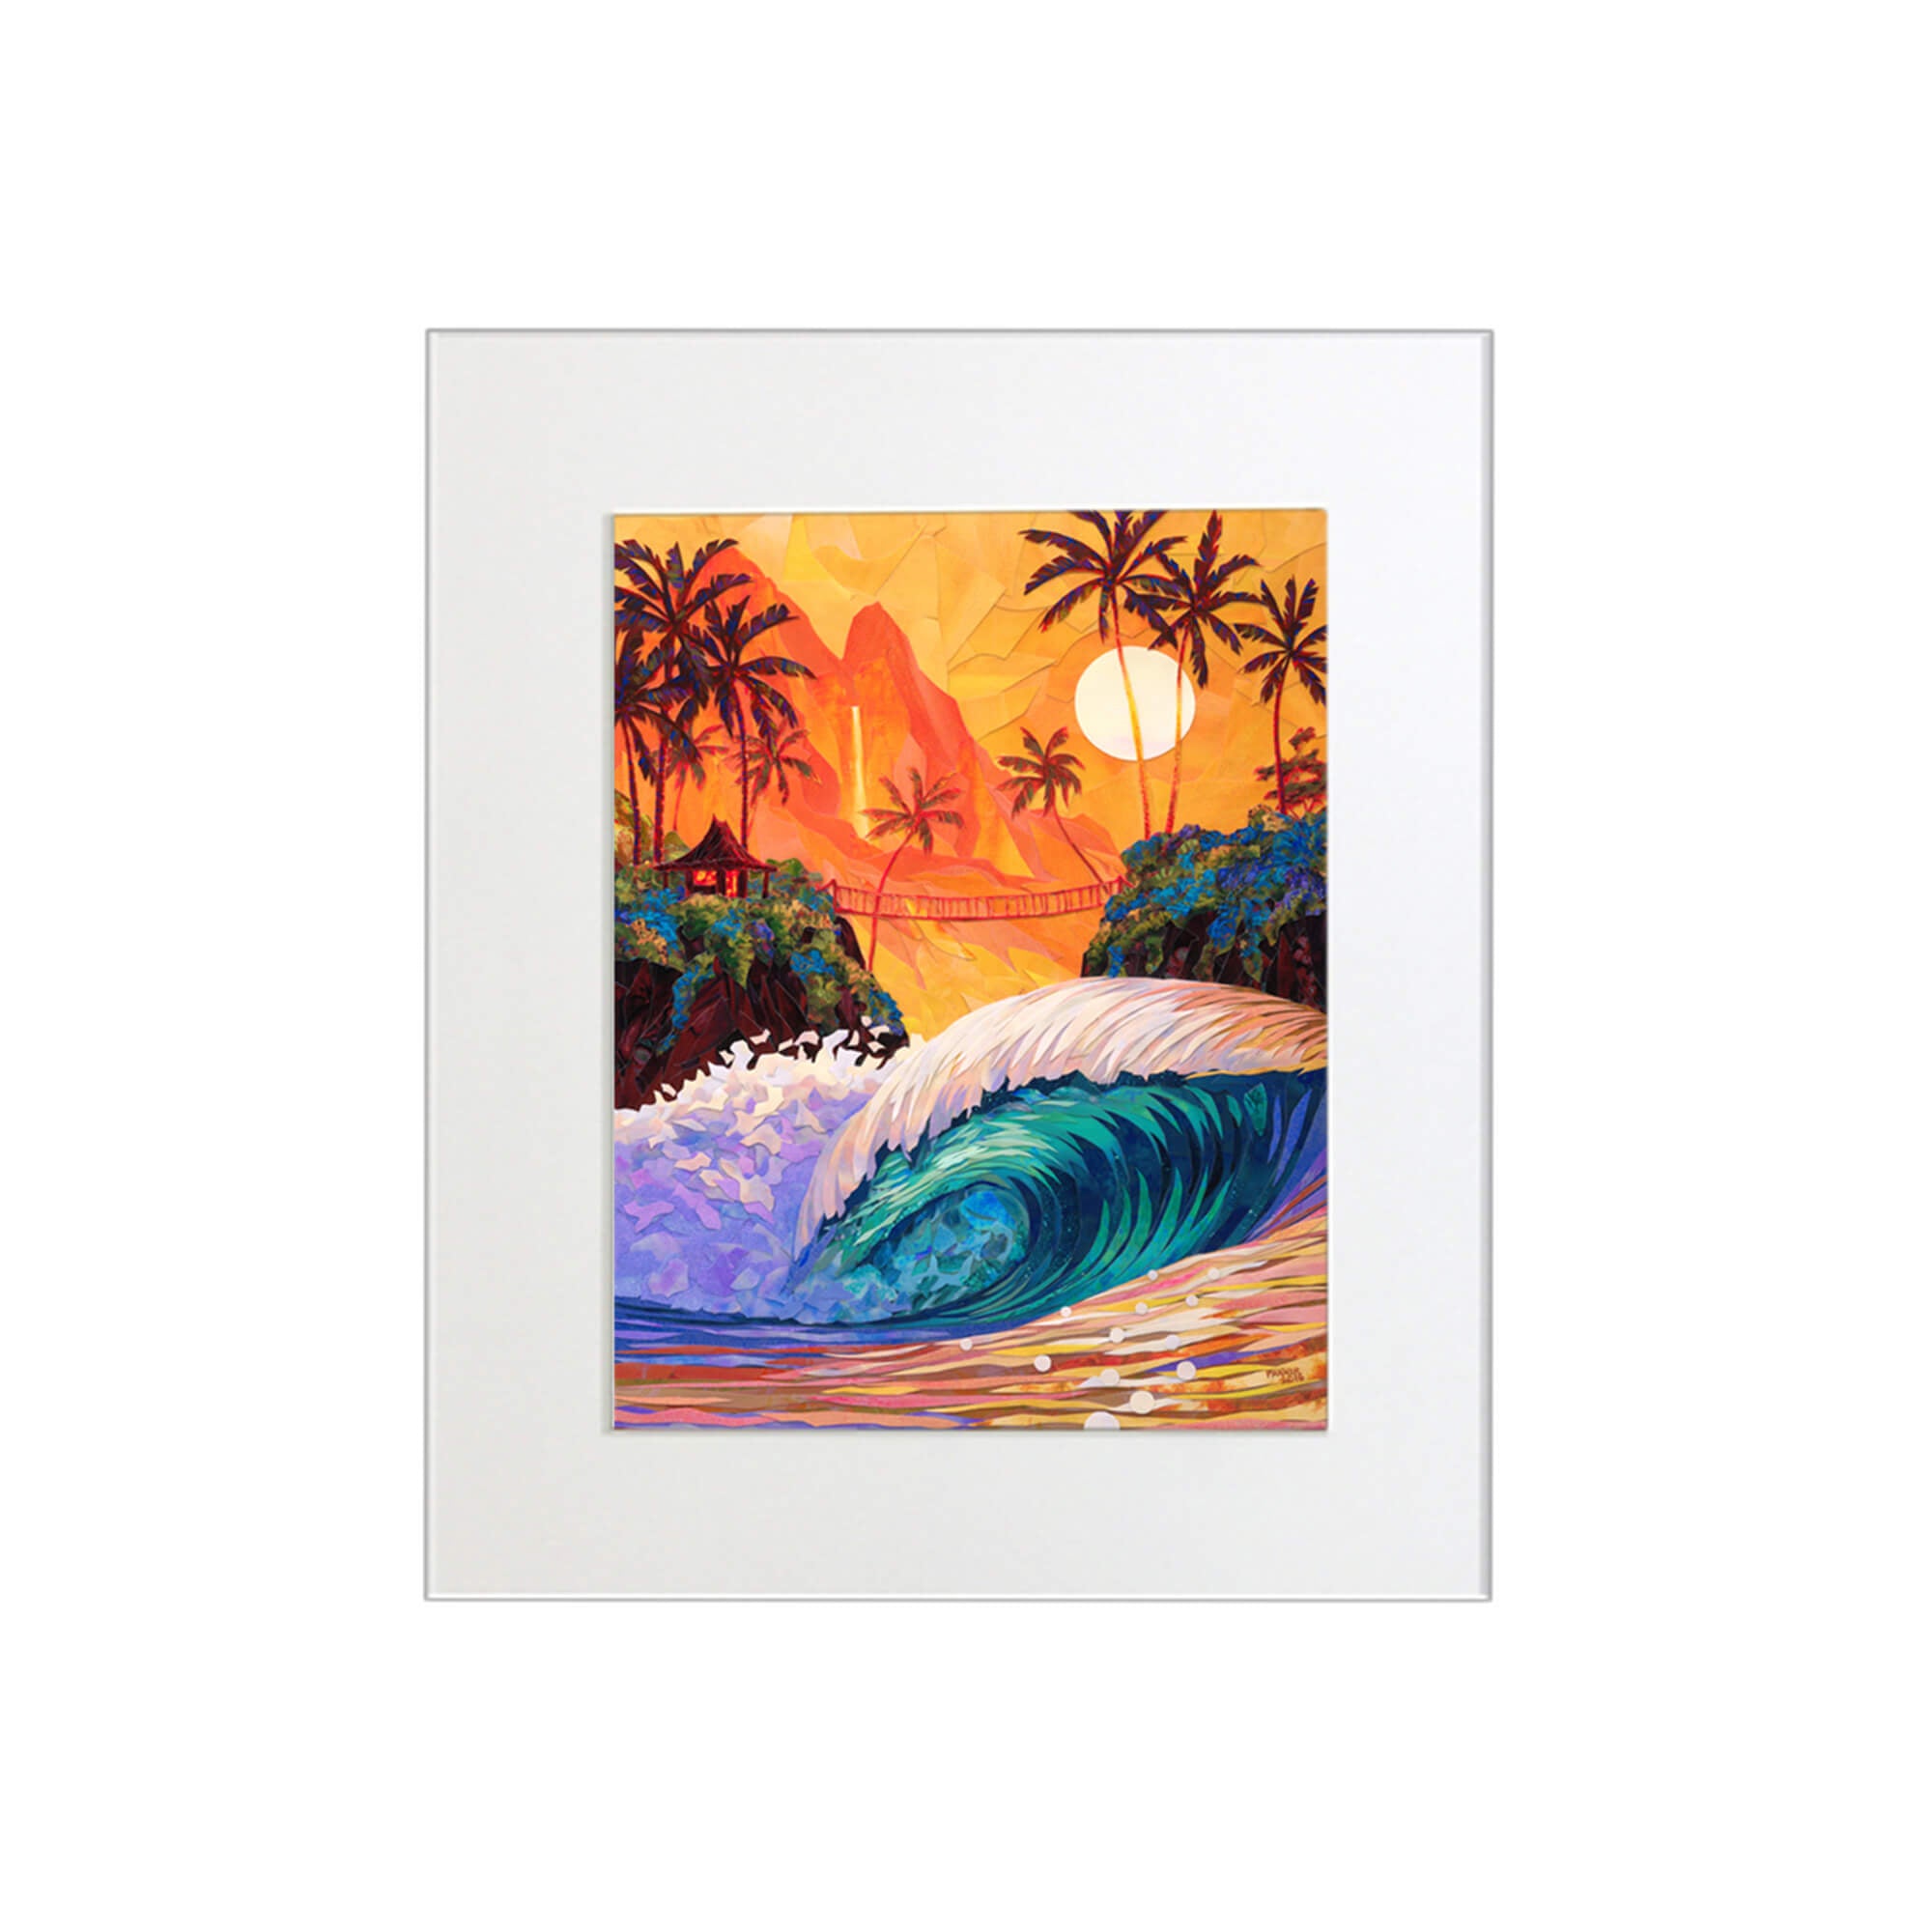 A matted art print featuring a collage of a vibrant sunset with teal-hued crashing waves, palm trees, and a mountain and waterfall background by Hawaii artist Patrick Parker